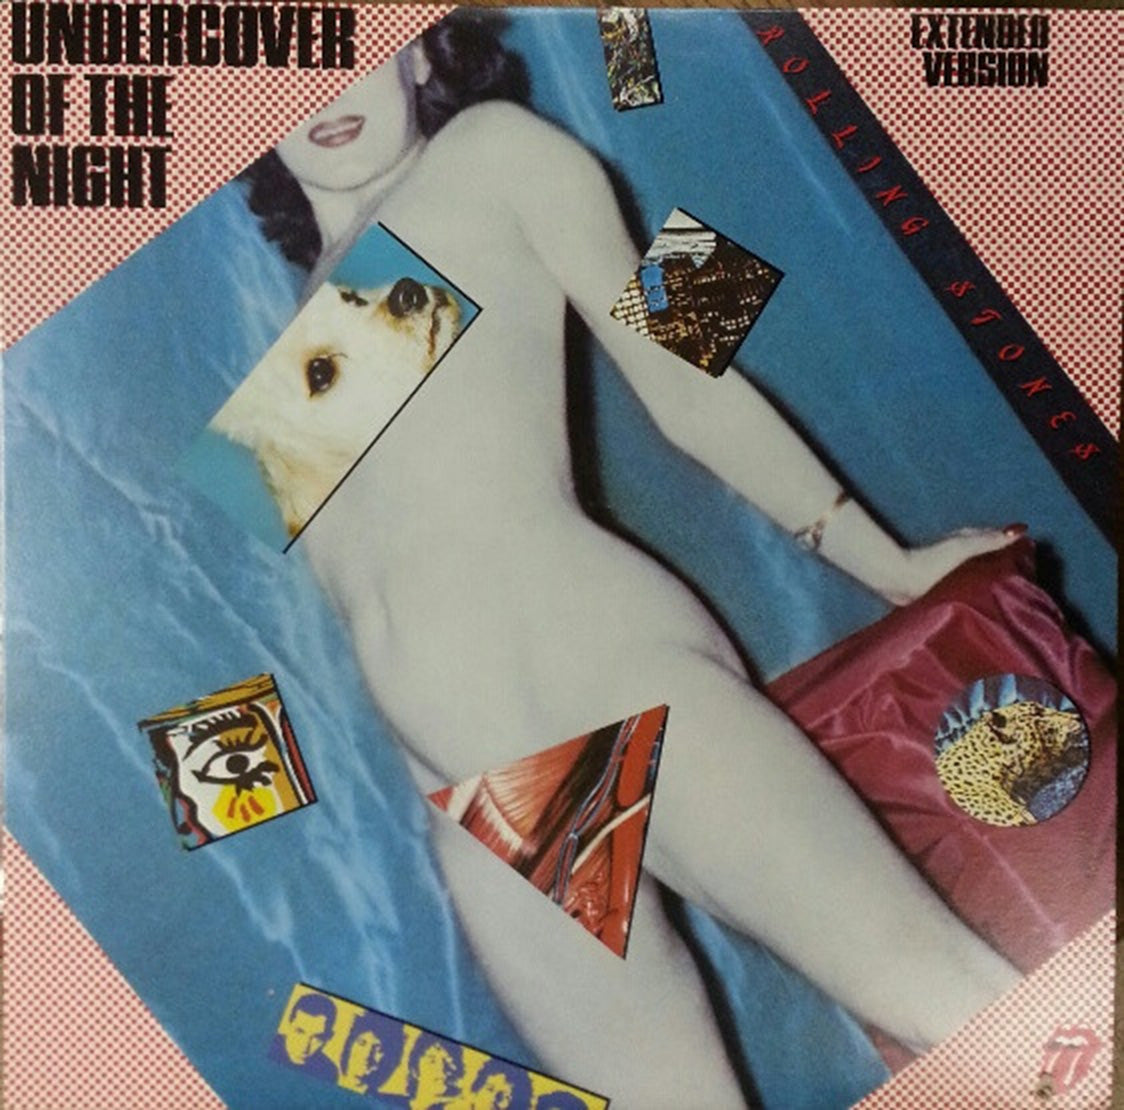 Rolling Stones – Undercover Of The Night (Extended Version)